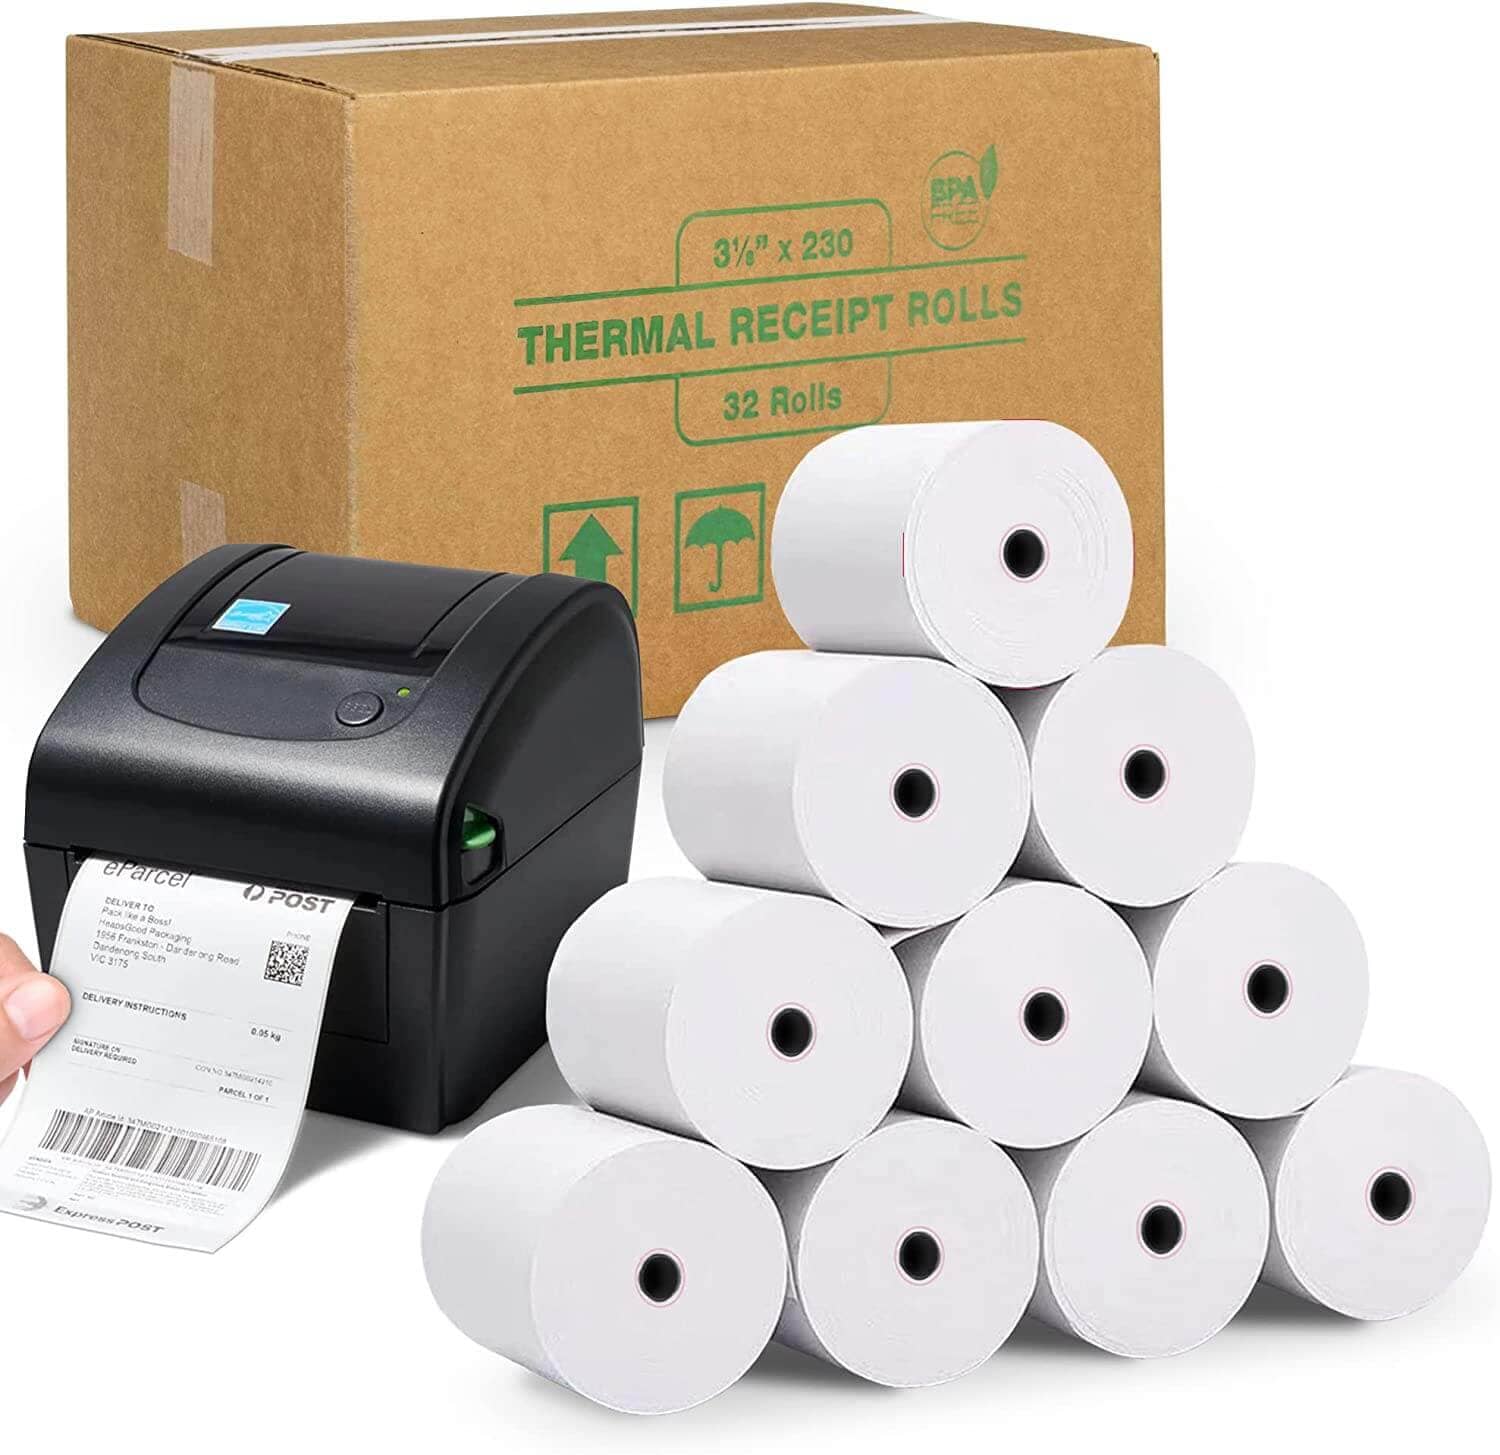 FHS 3 1/8” X 230’ Thermal Paper for Receipts - 32 Rolls of Receipt Paper Compatible with Wide Range of POS Systems for Small Business – Use as Receipt Paper, Cash Registers Printer, ATM Machine - fhs-paperrolls